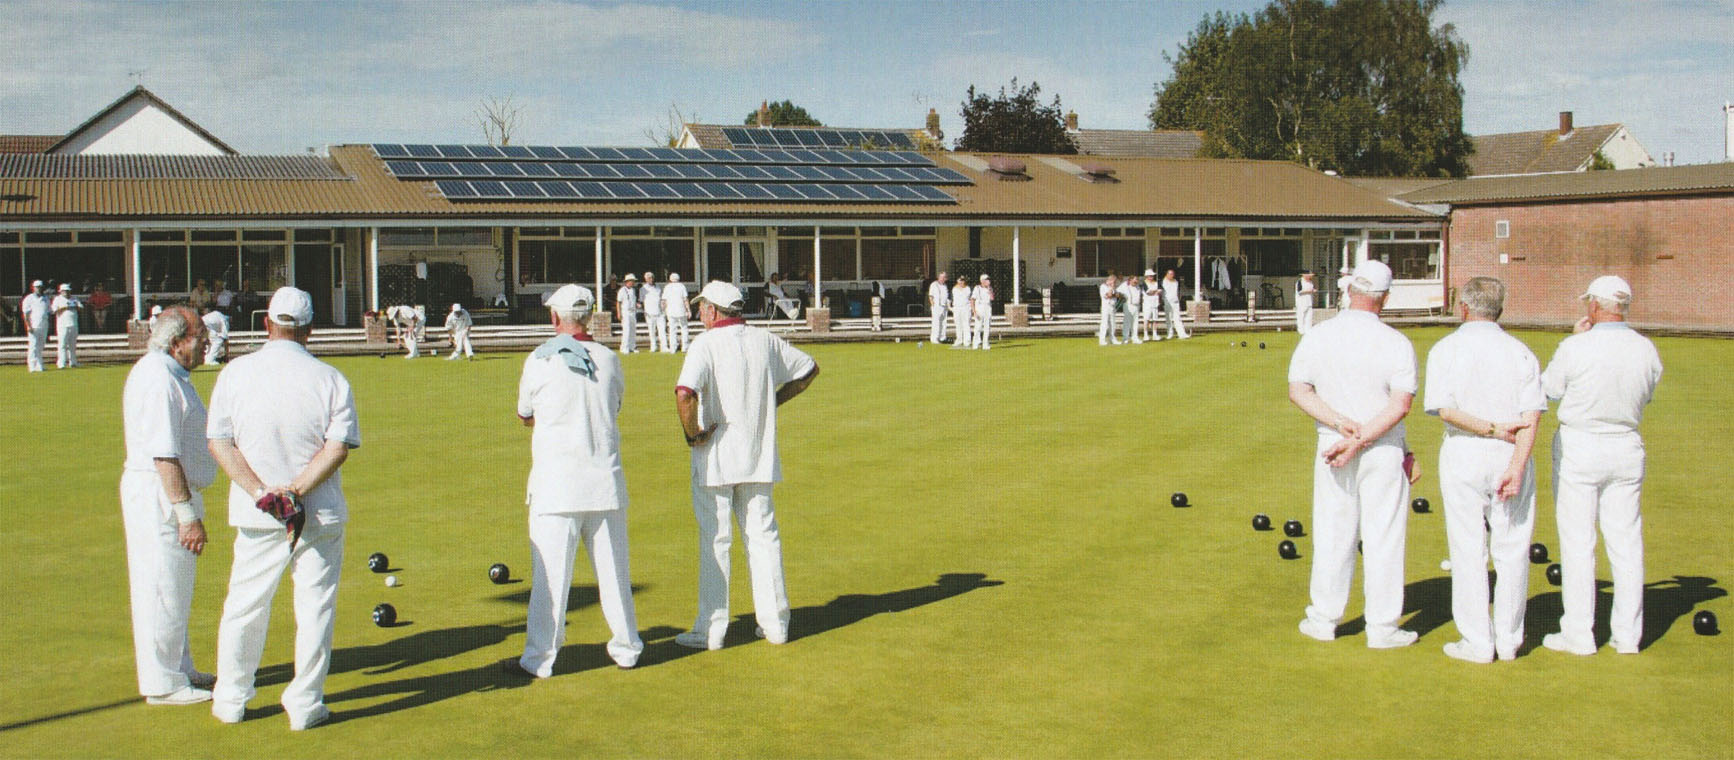 Nailsea Bowls Club On the Green